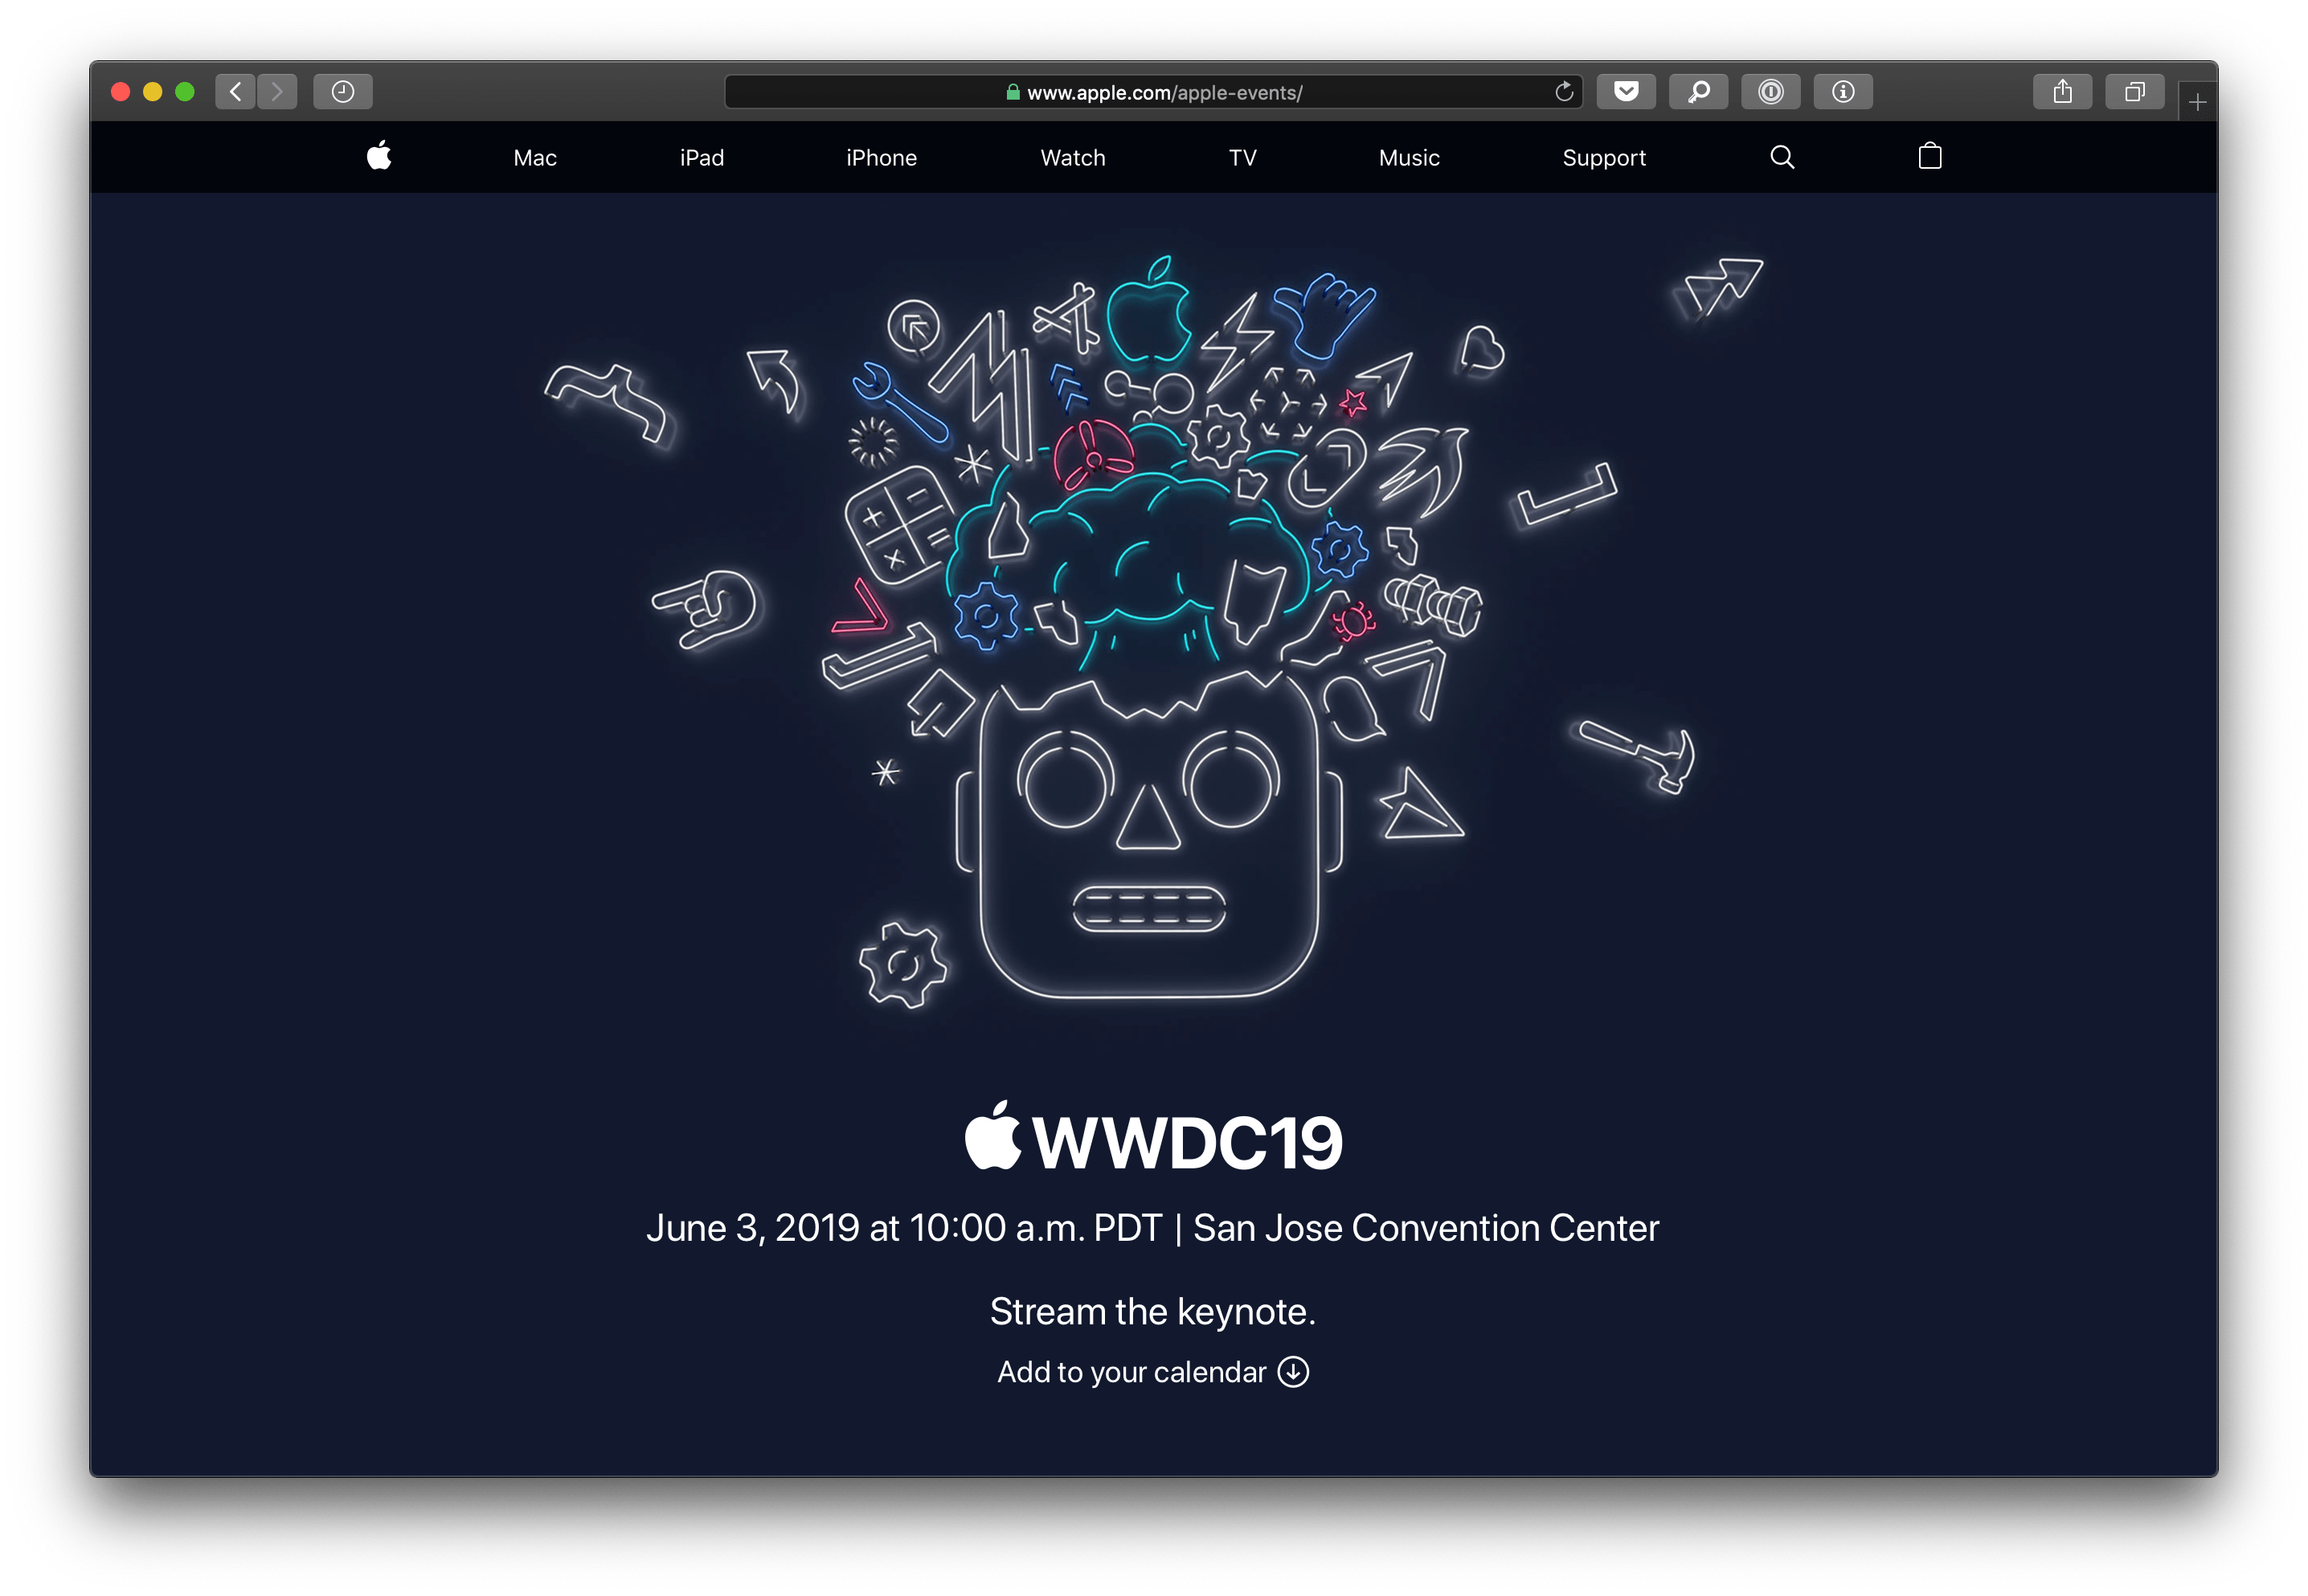 Apple streaming to WWDC19